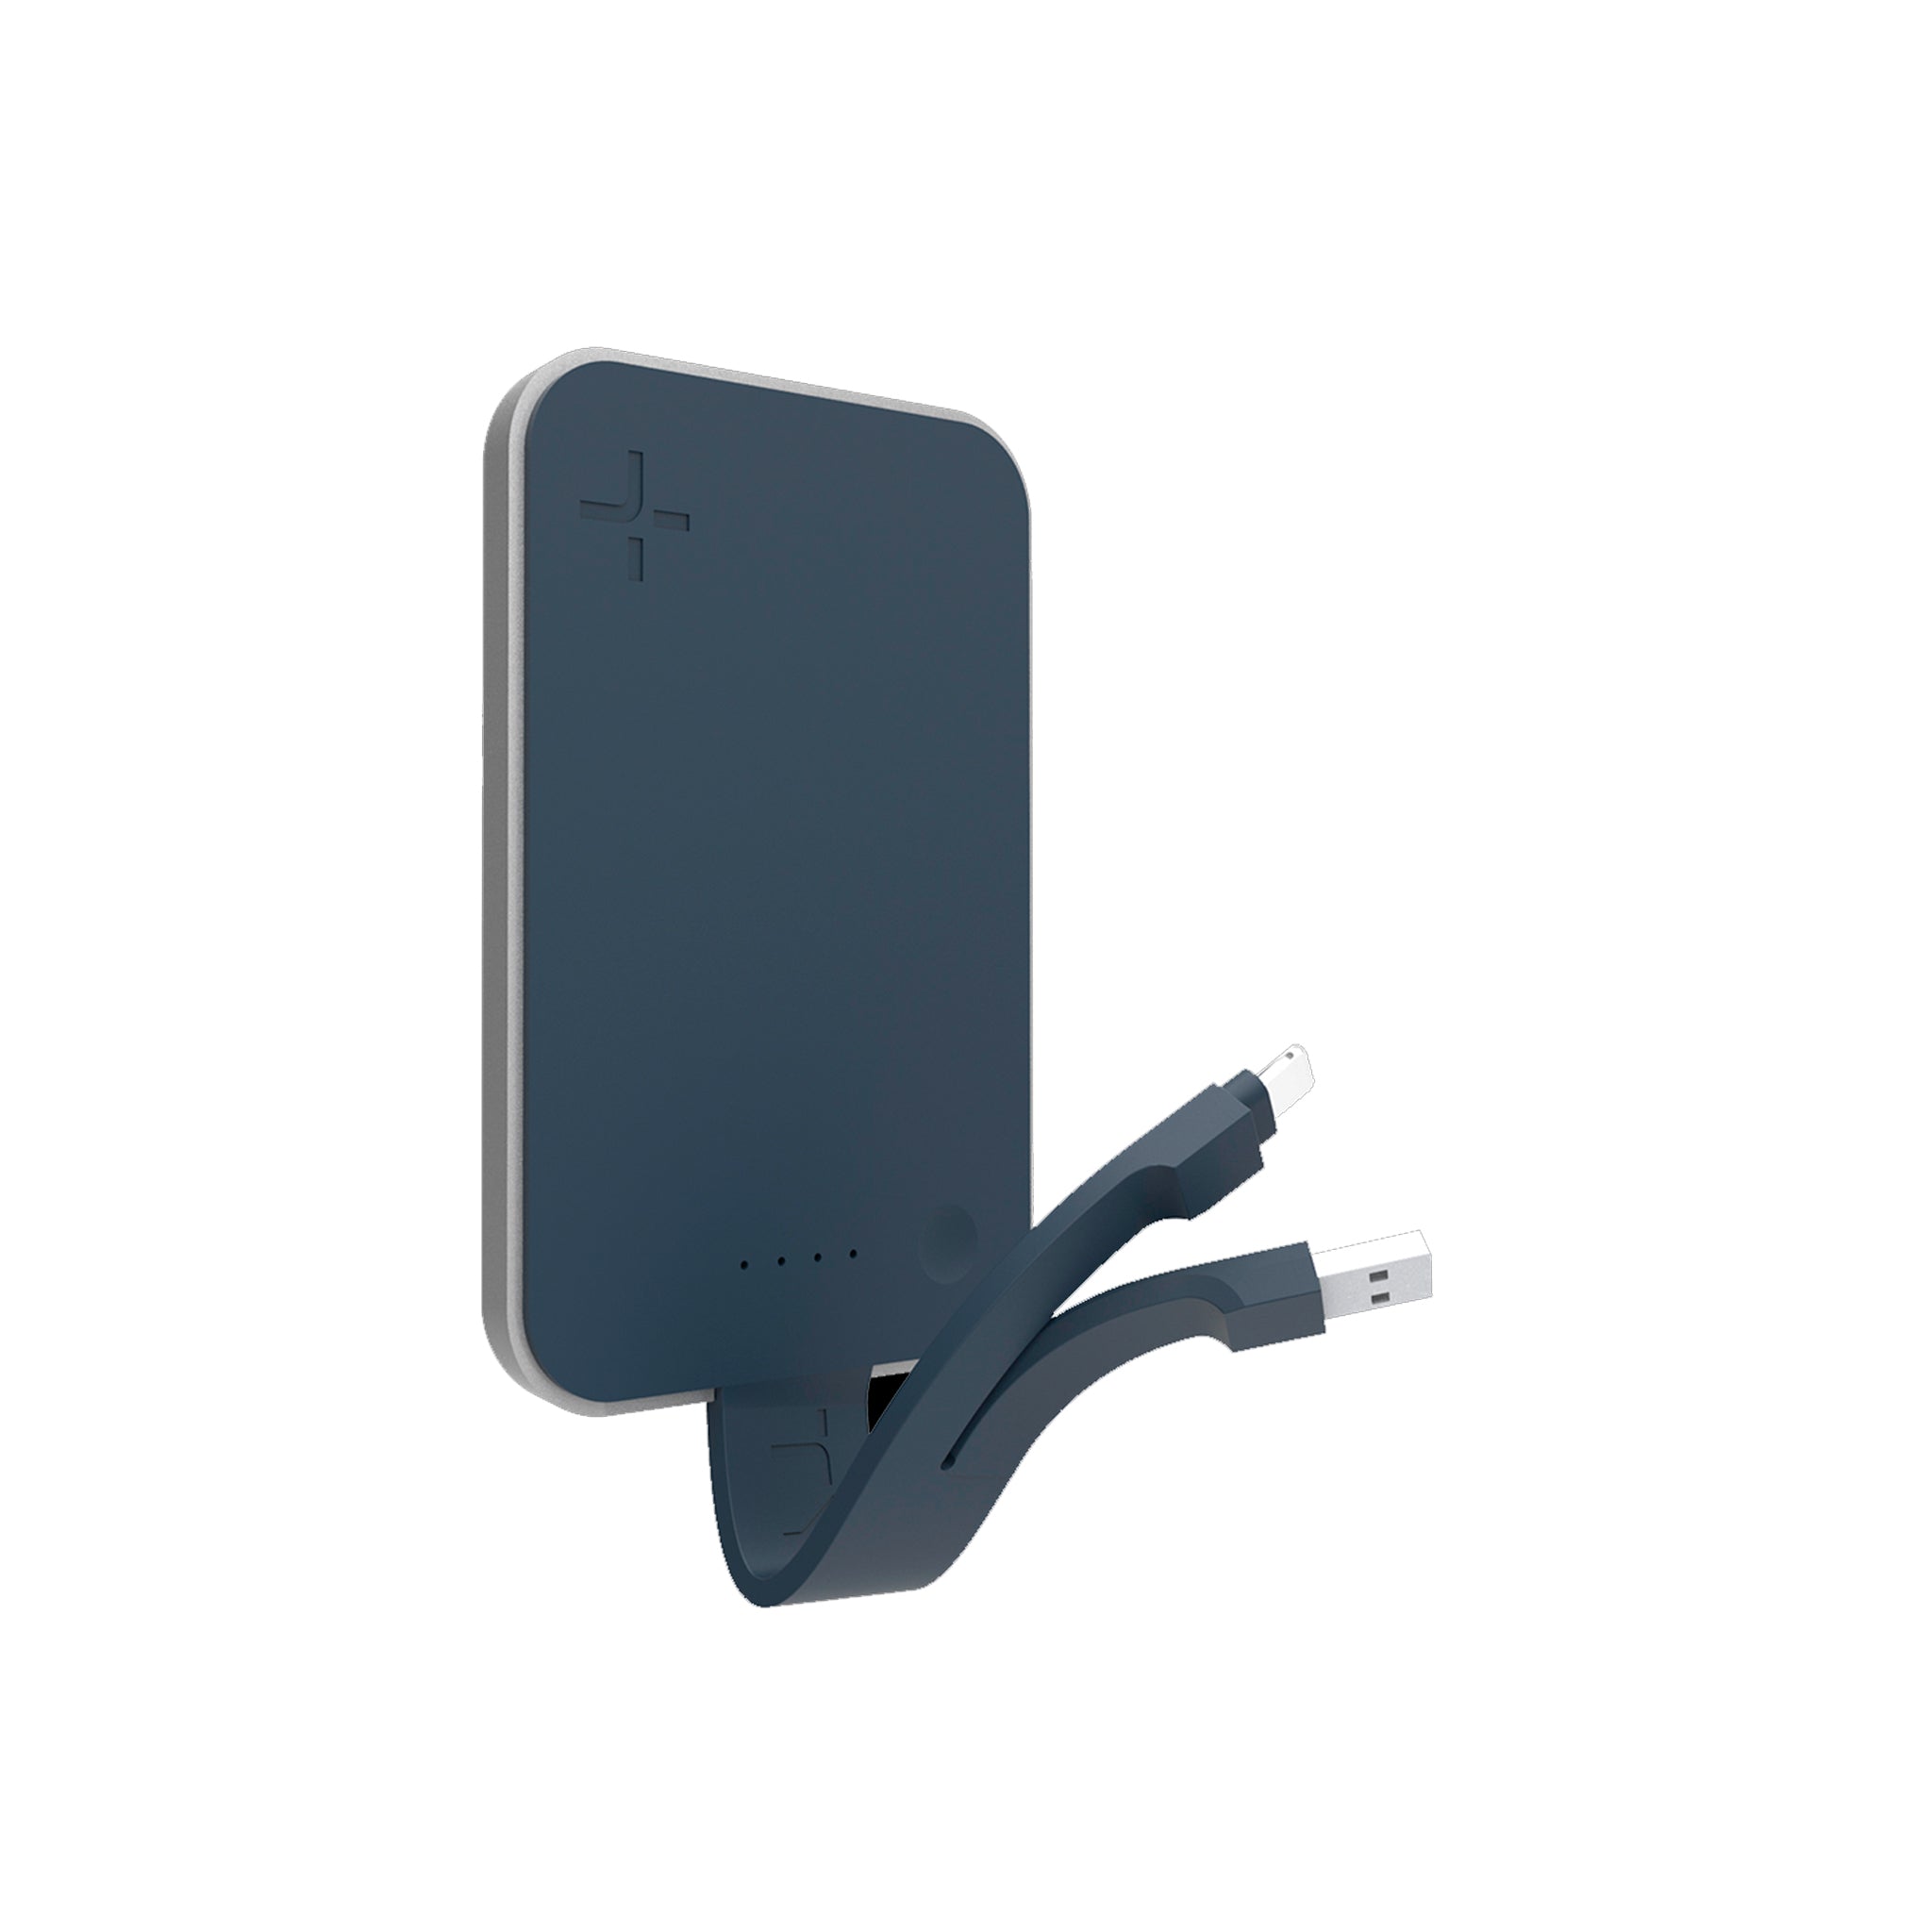 Tylt - Flipcard Power Bank For Type C Devices 5,000 Mah - Gray